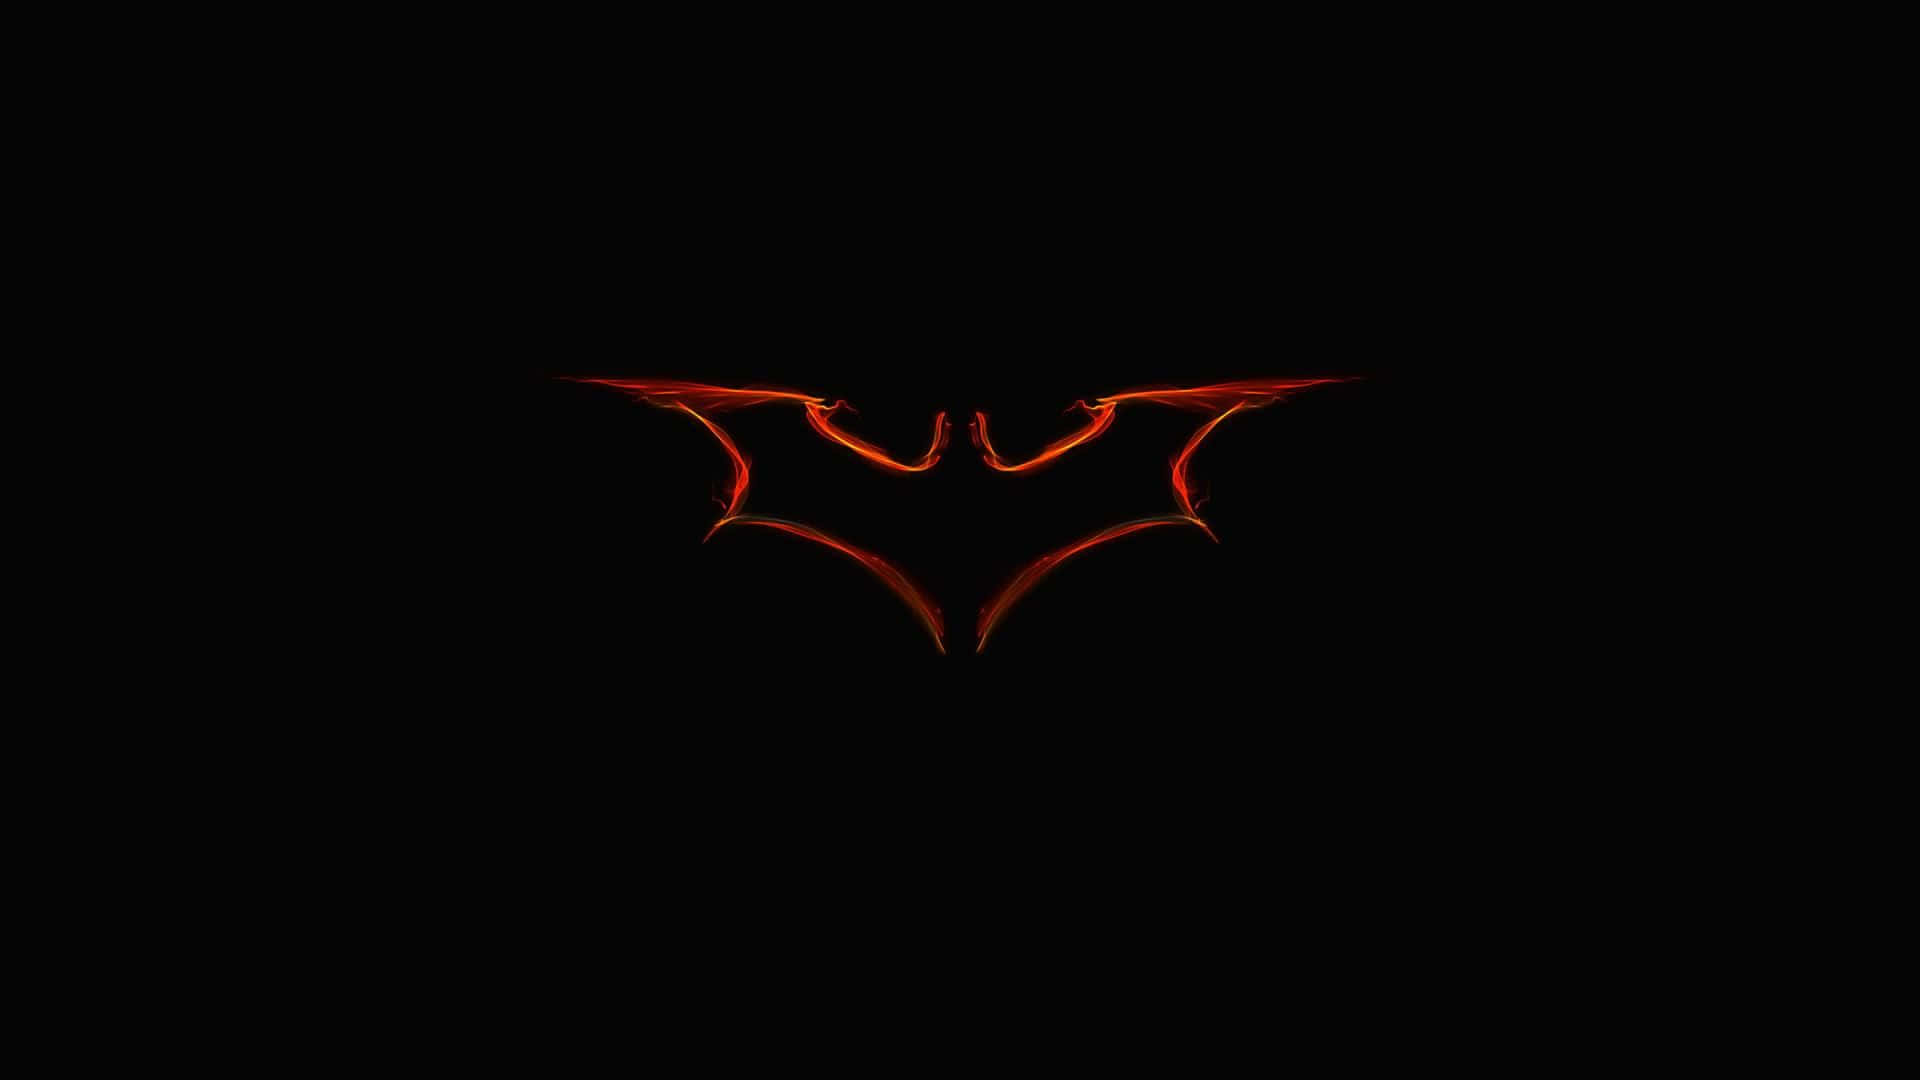 "The Red Batman Logo - a Symbol of Power and Justice" Wallpaper